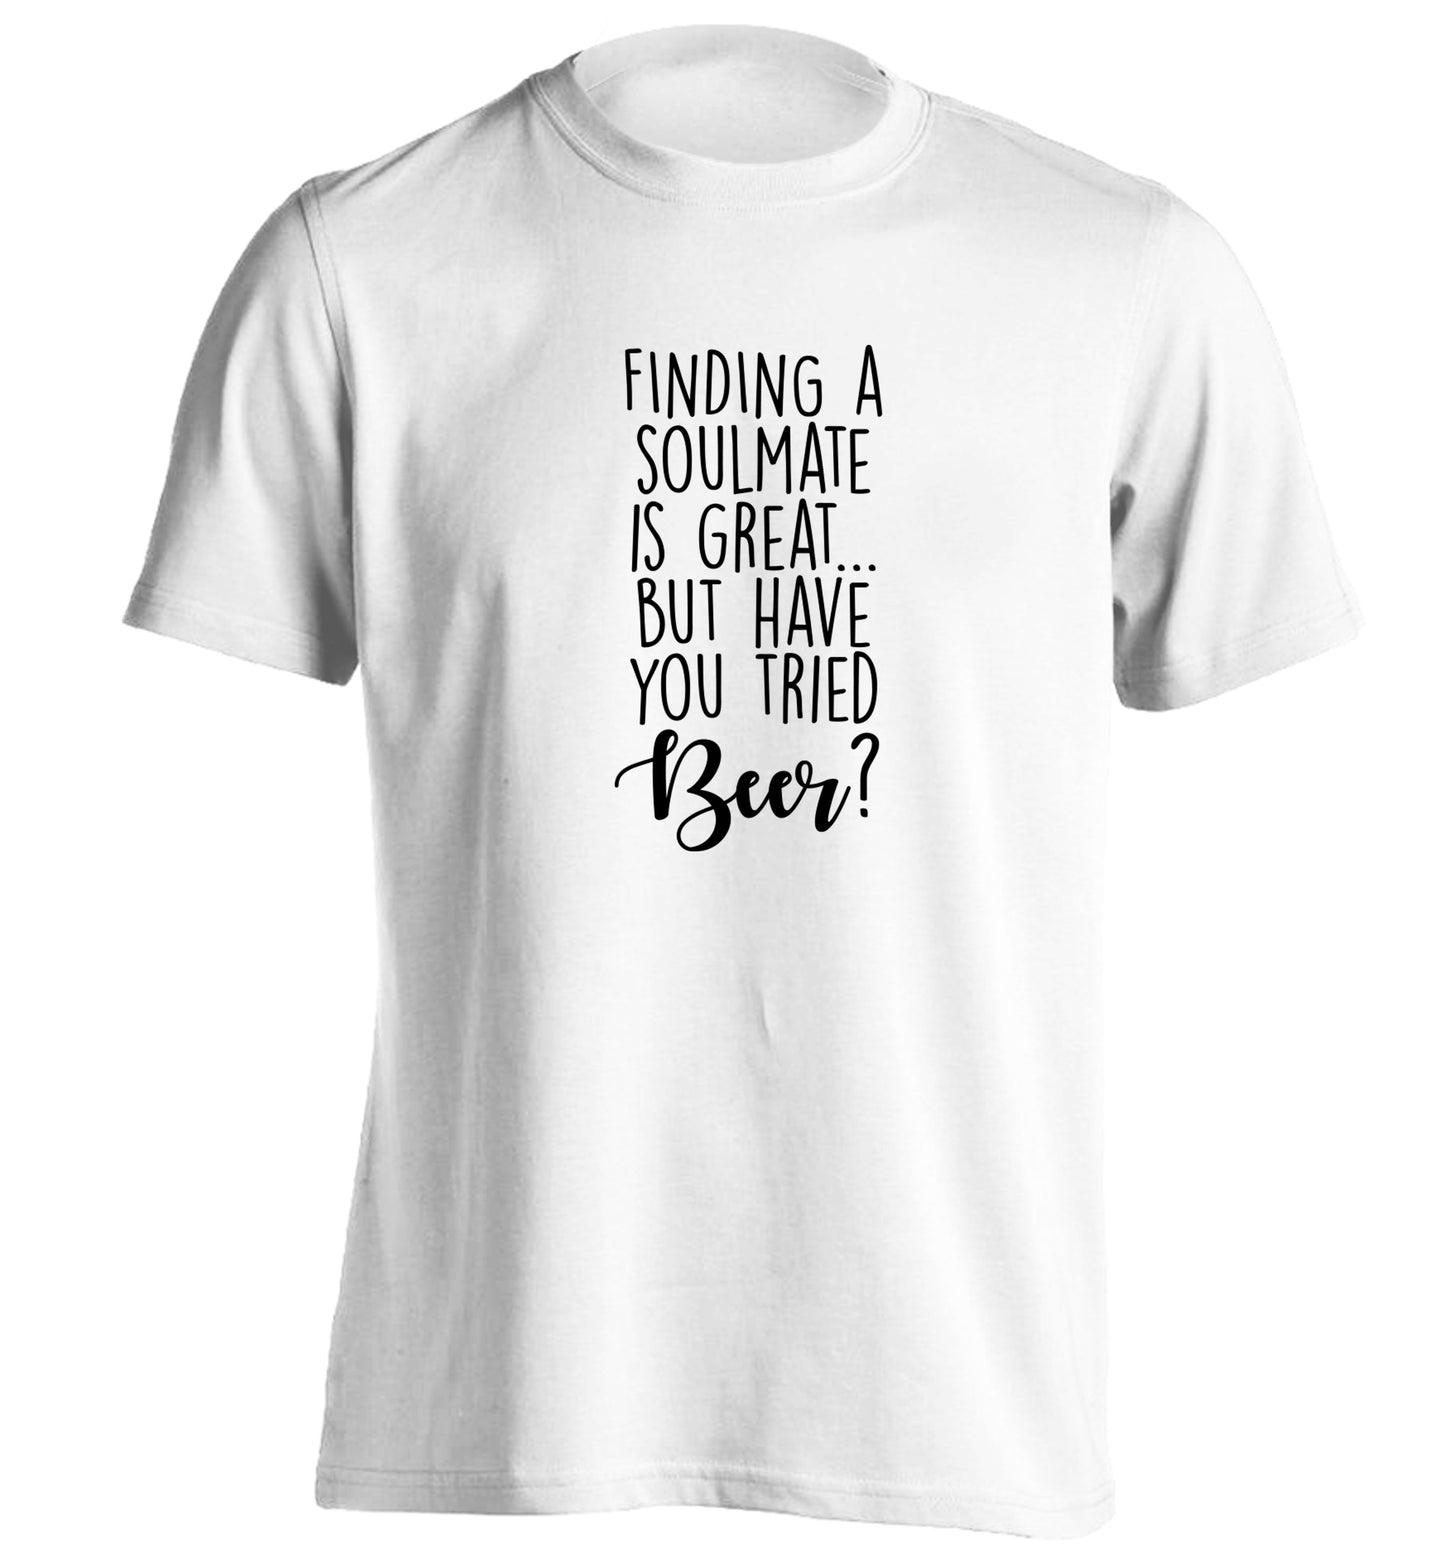 Finding a soulmate is great but have you tried beer? adults unisex white Tshirt 2XL